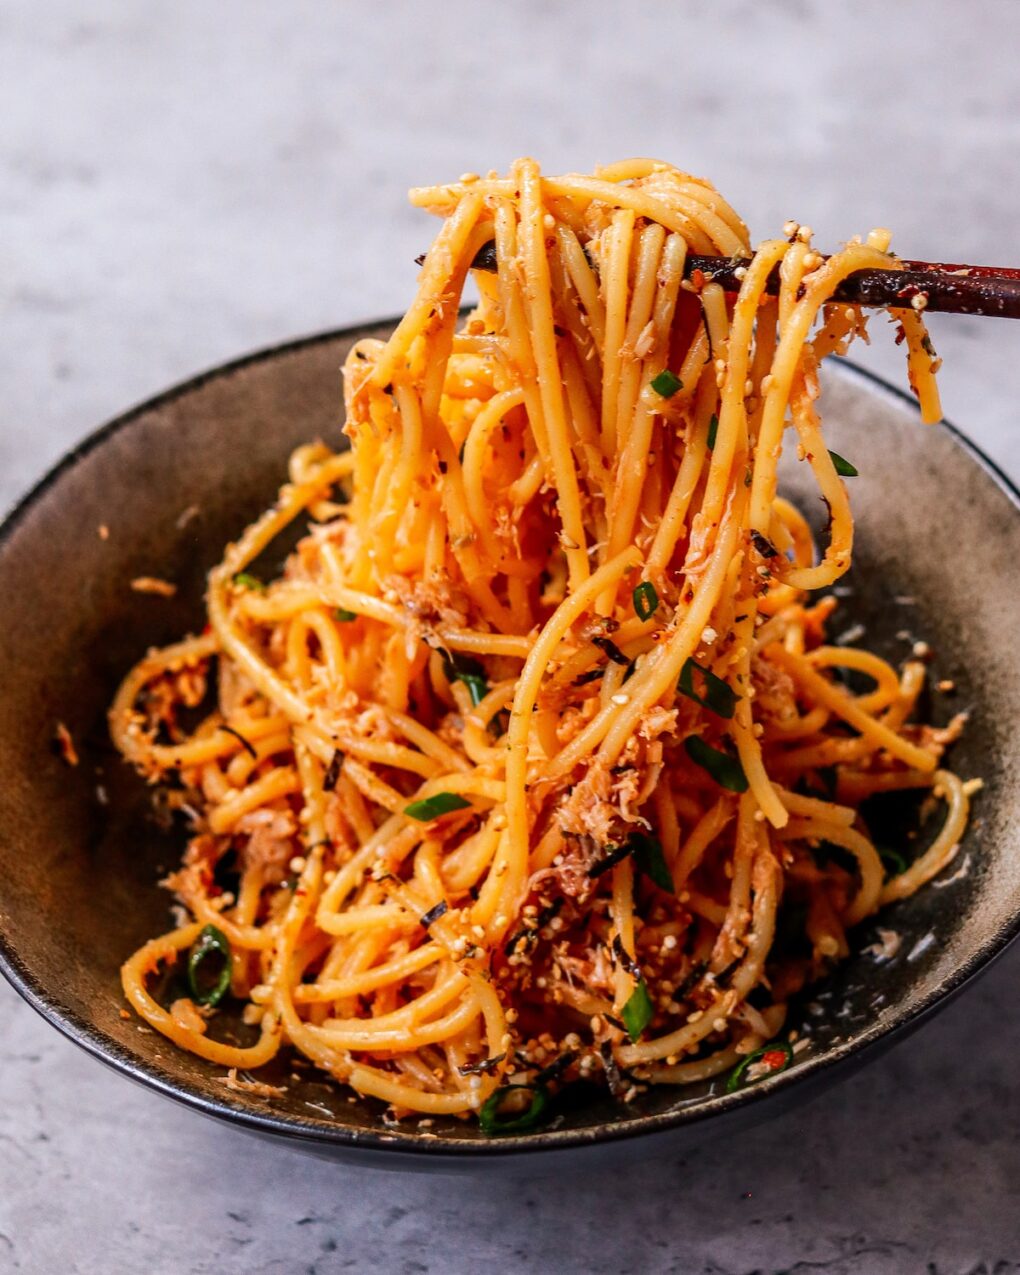 Spicy Crab Miso Spaghetti with Fly by Jing Sichuan Chili Crisp Recipe Noodles